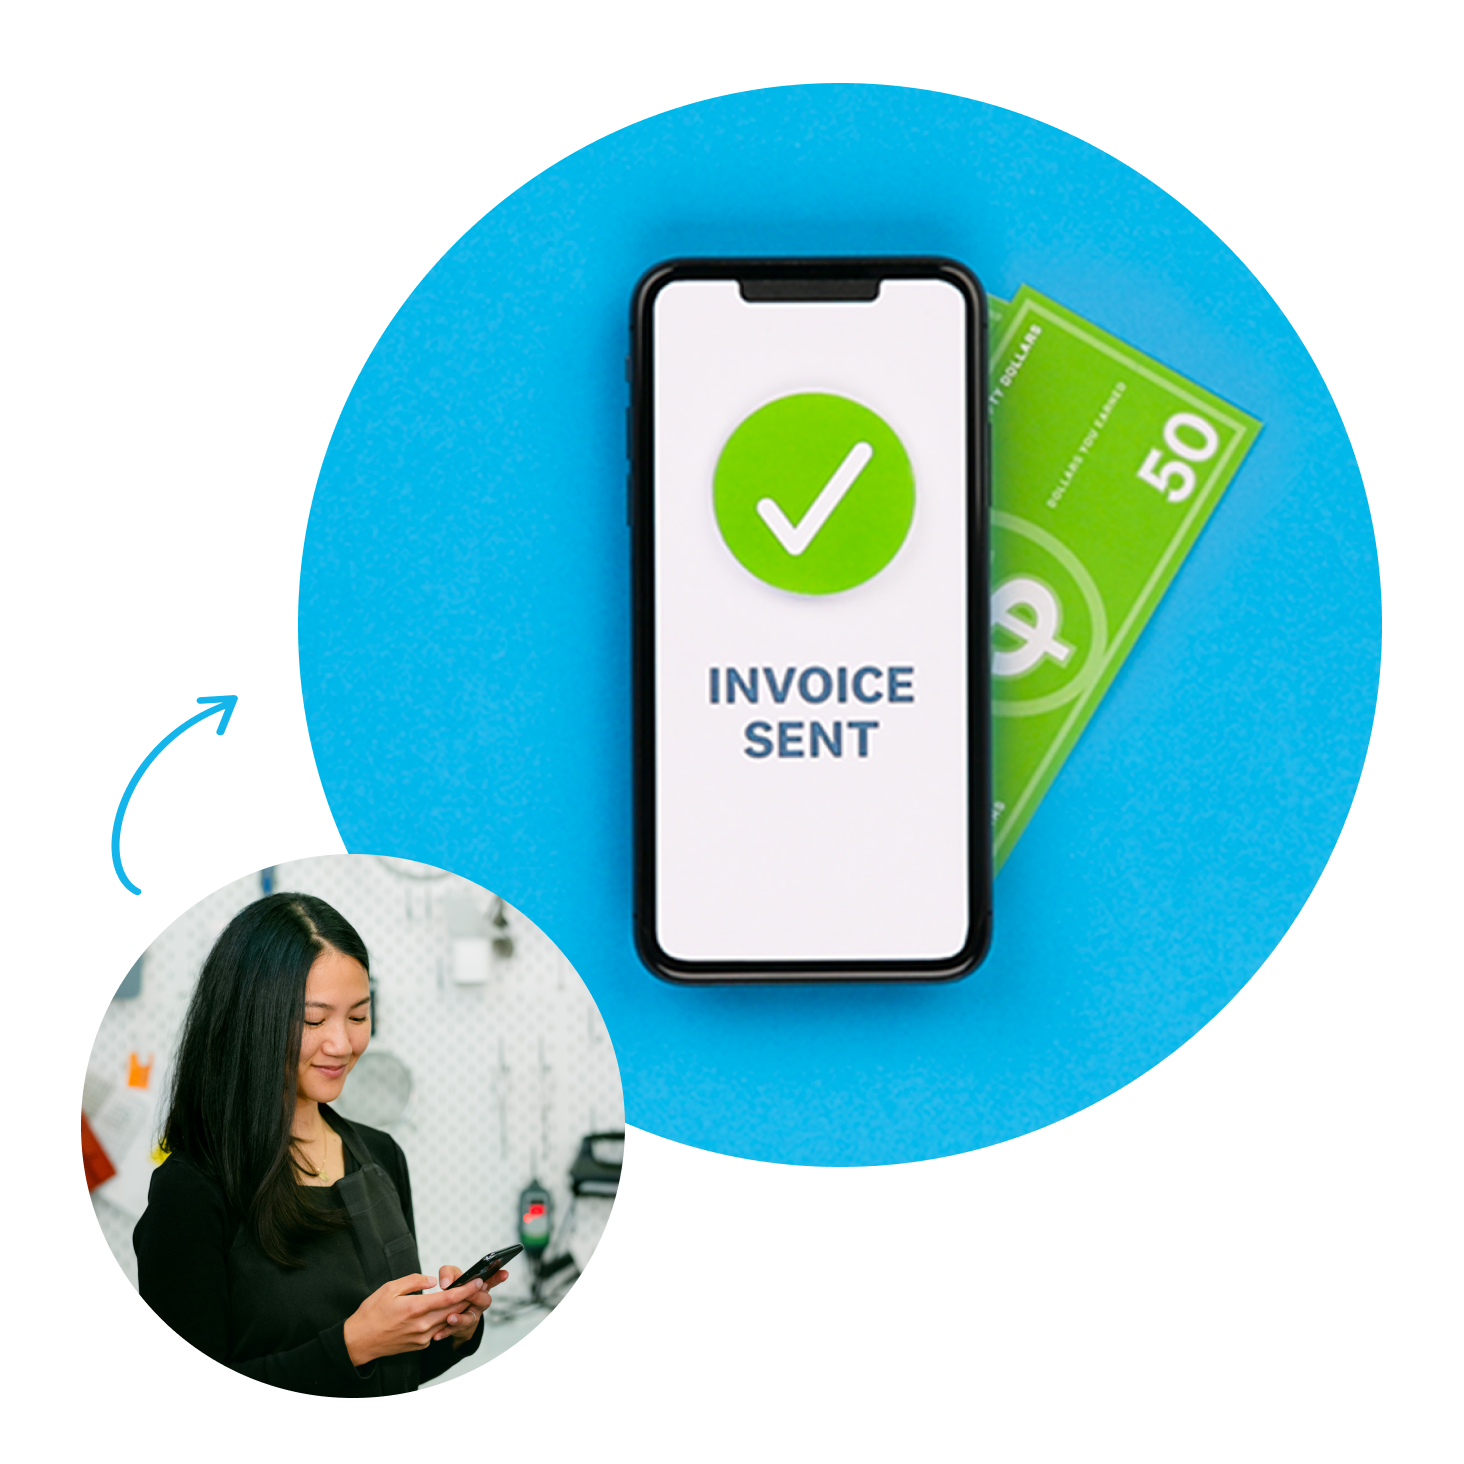 A Xero user adds items to invoices using the stock control system.